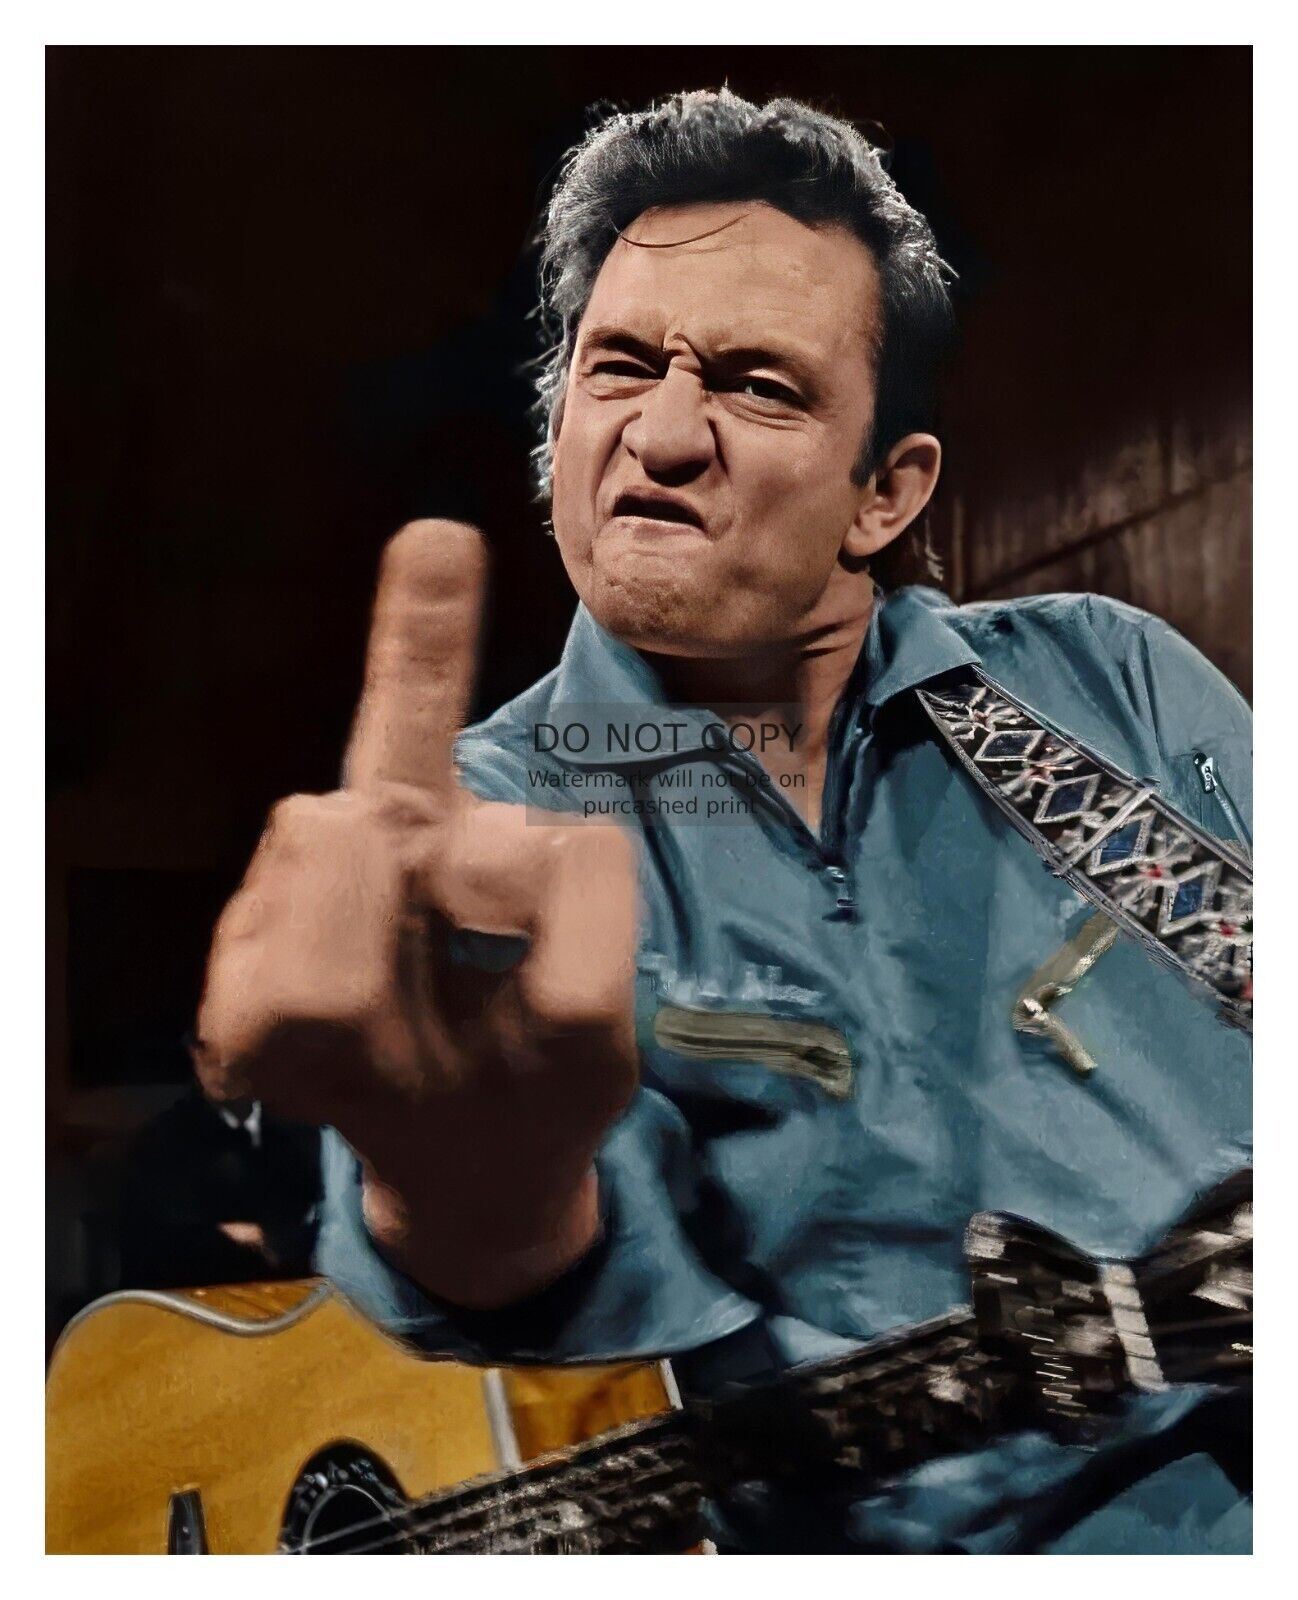 JOHHNY CASH FLIPPING THE BIRD TO THE CAMERA COUNTRY SINGER 8X10 COLORIZED PHOTO